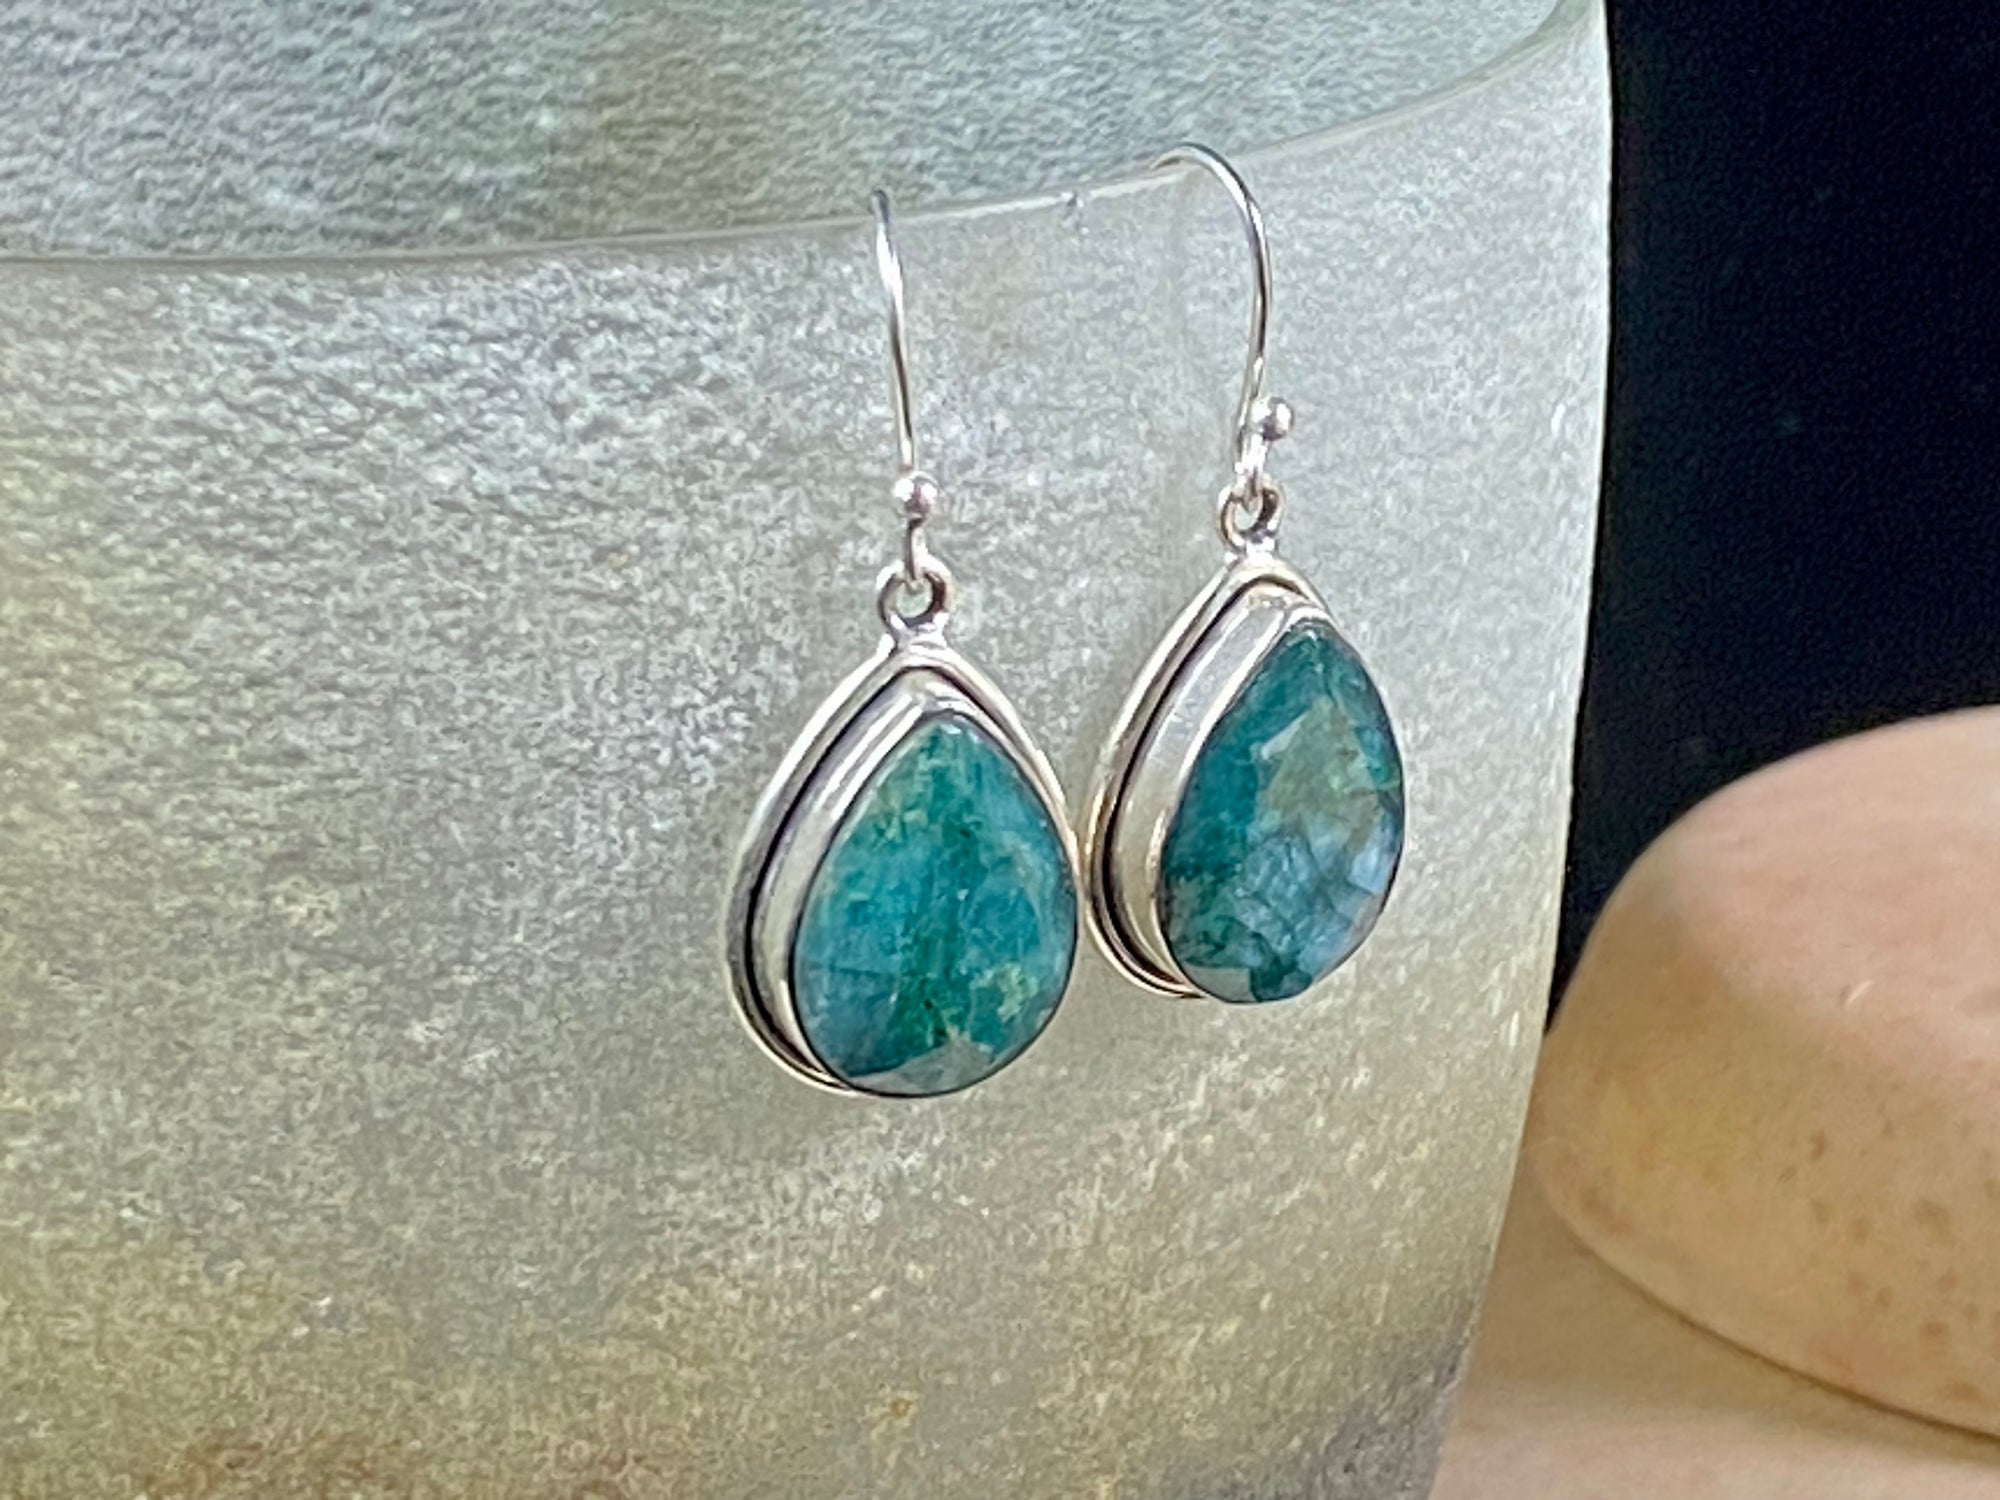 Our beautiful teardrop emerald earrings feature large facet cut emeralds of a deep variegated green colour. They are set in a sterling silver shadow box mount to highlight their beauty. measurements 3.6 cm length including hook.